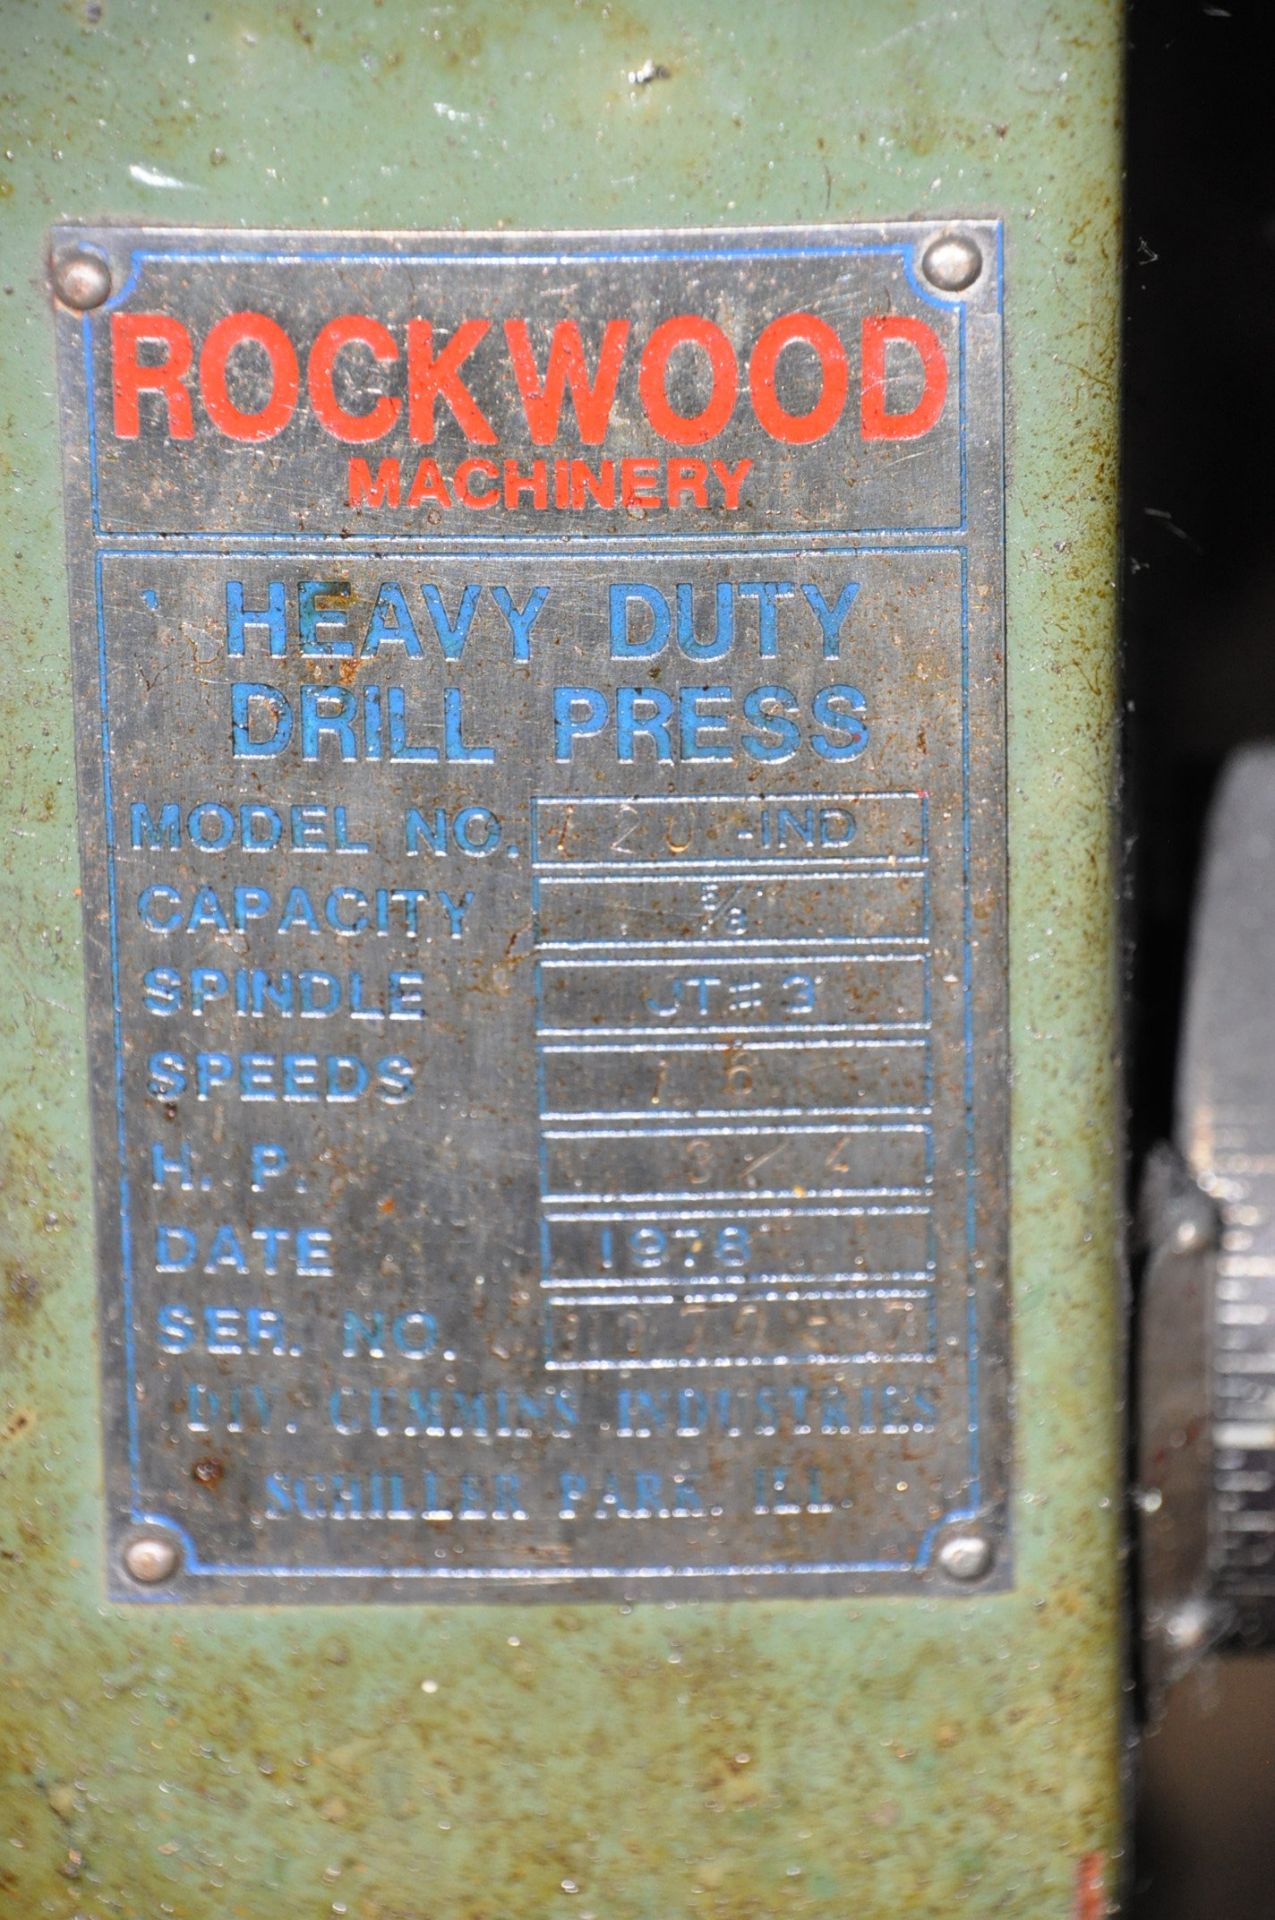 Rockwood Model 120A, 12" Variable Speed Bench Top Drill Press - Image 3 of 3